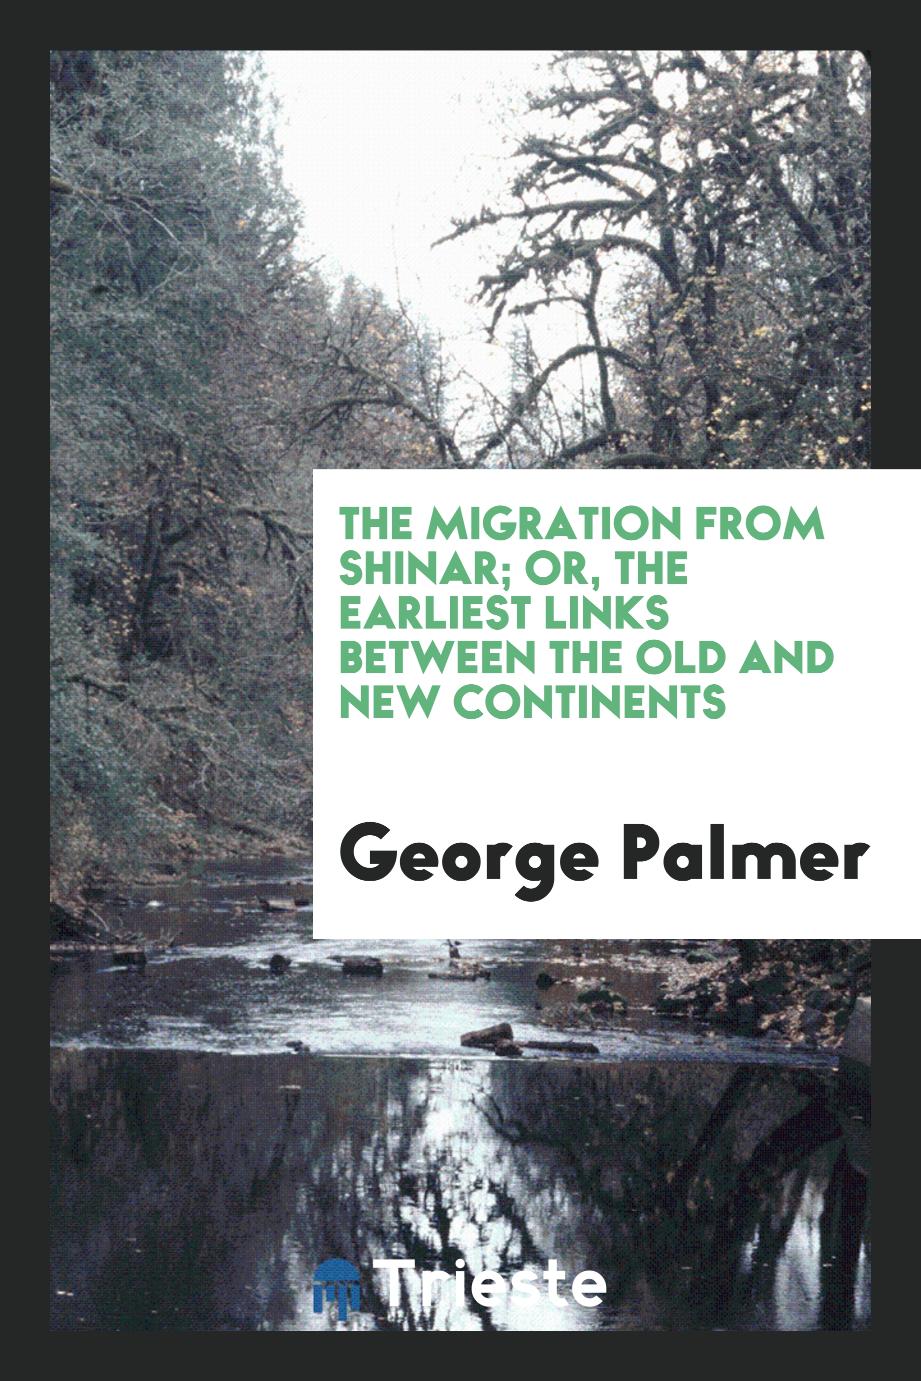 The migration from Shinar; or, the earliest links between the old and new continents